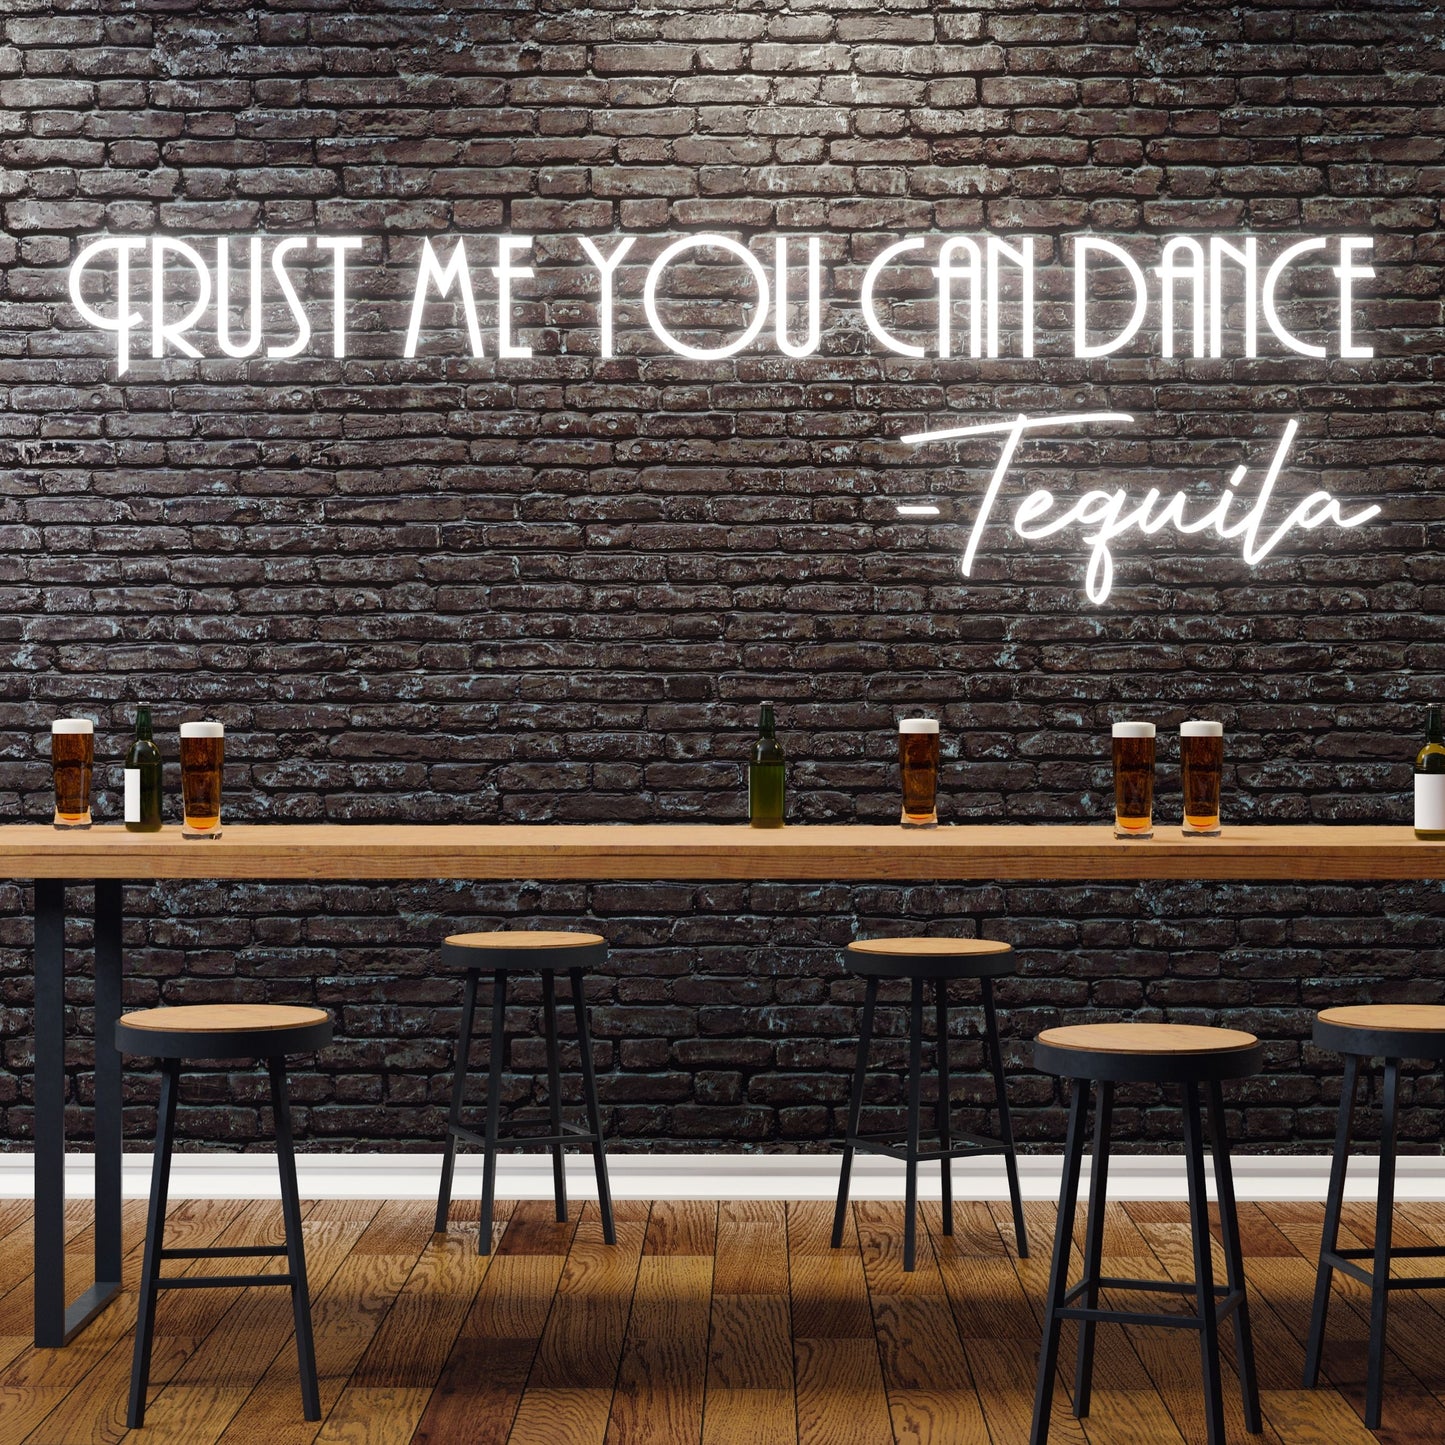 Trust me you can dance -Tequila Neon Sign